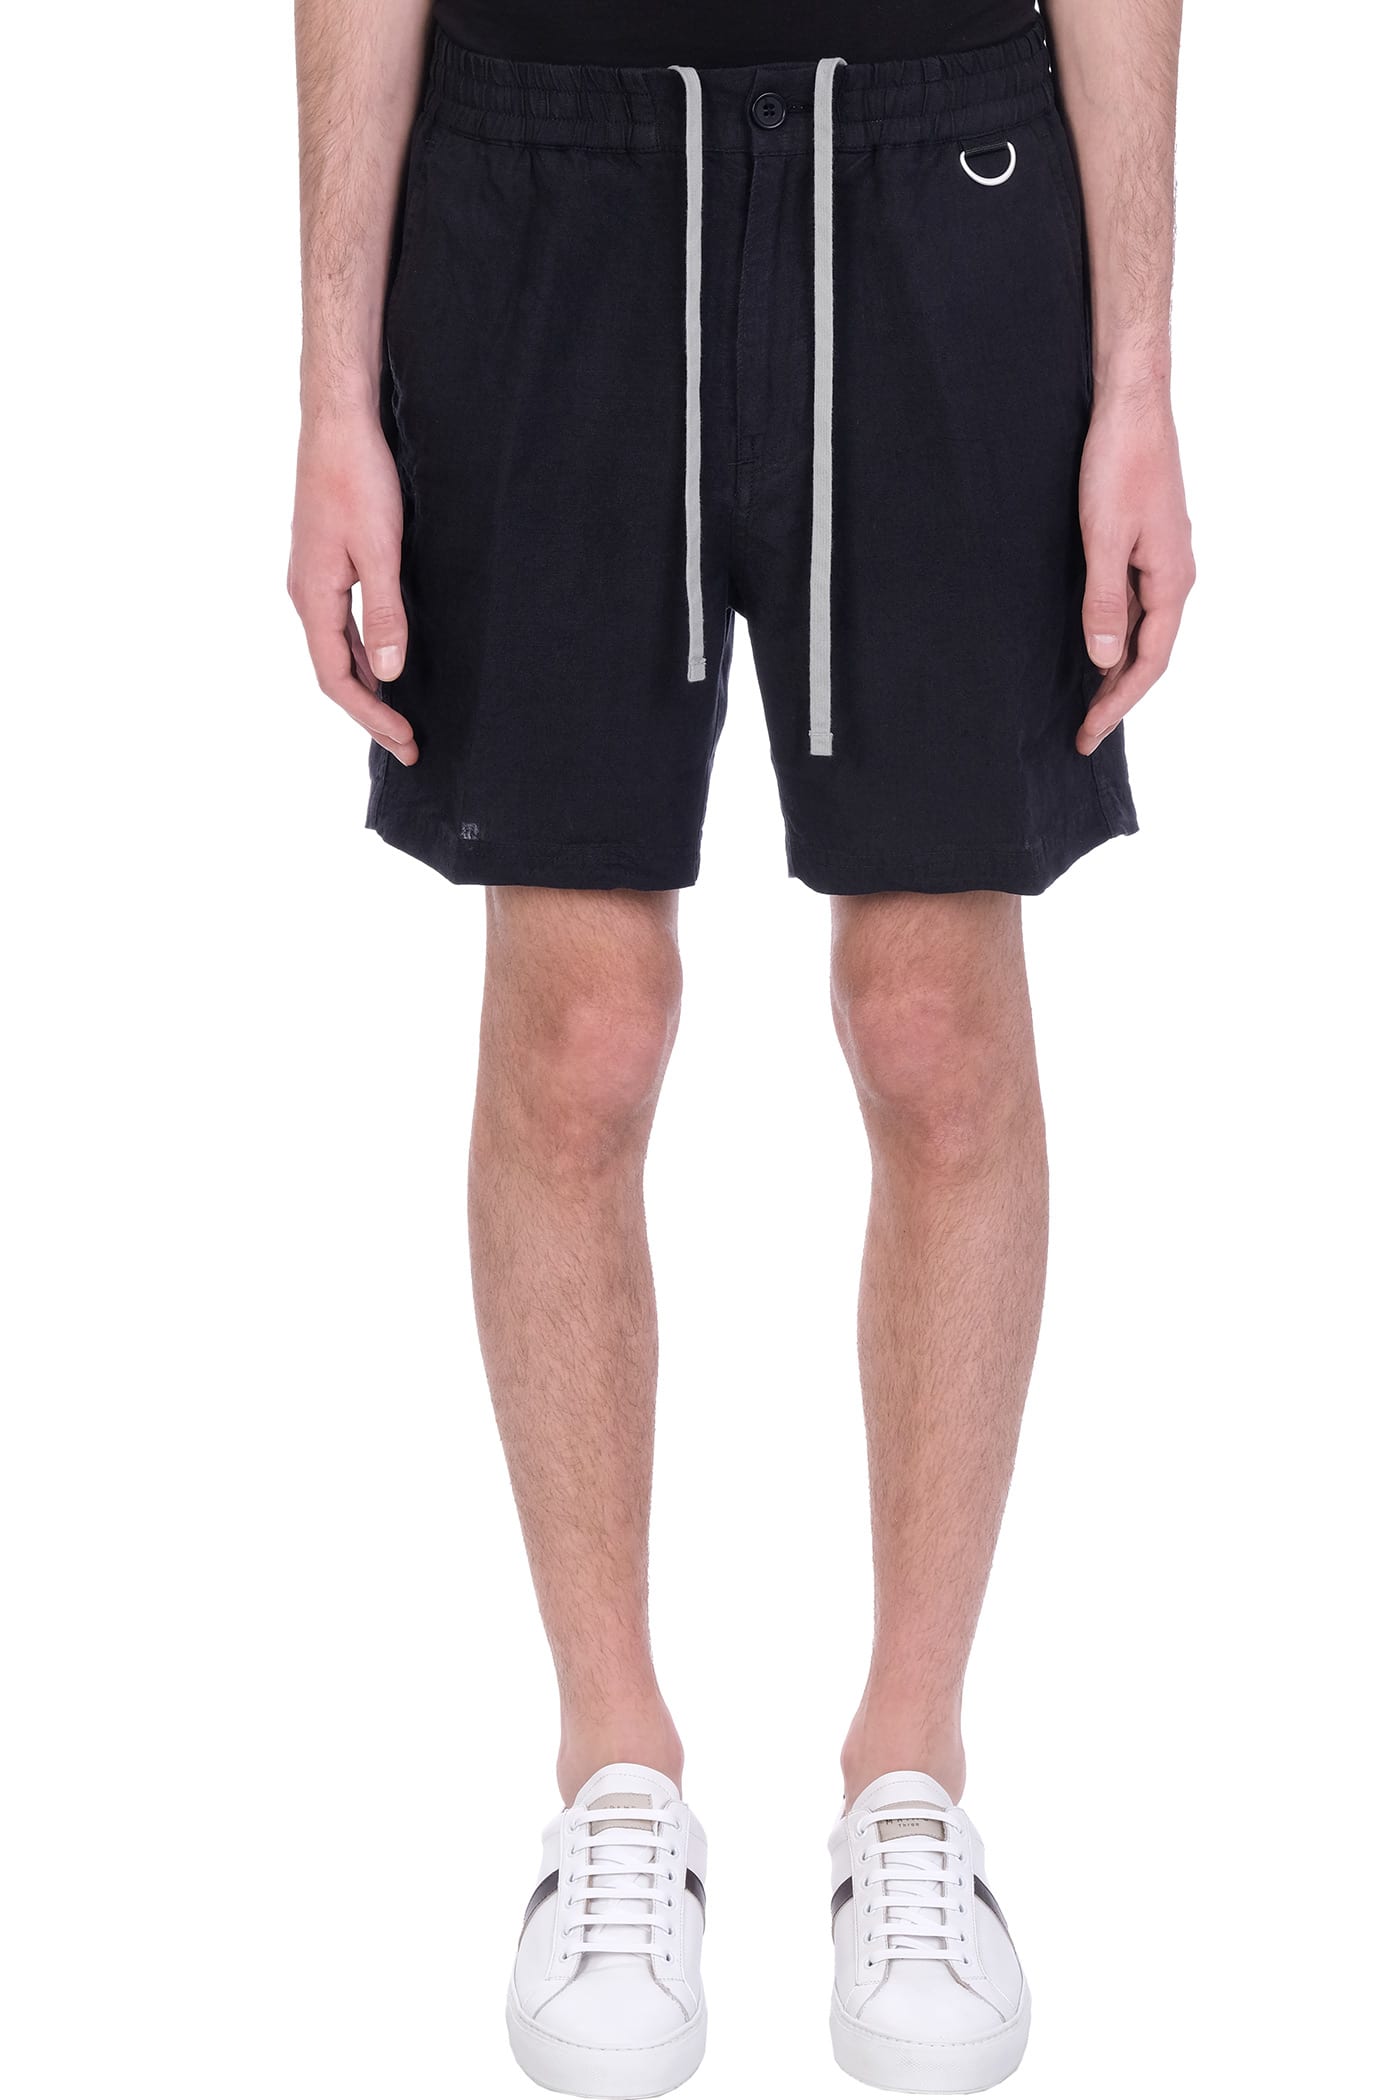 Low Brand Taylor Shorts In Black Linen